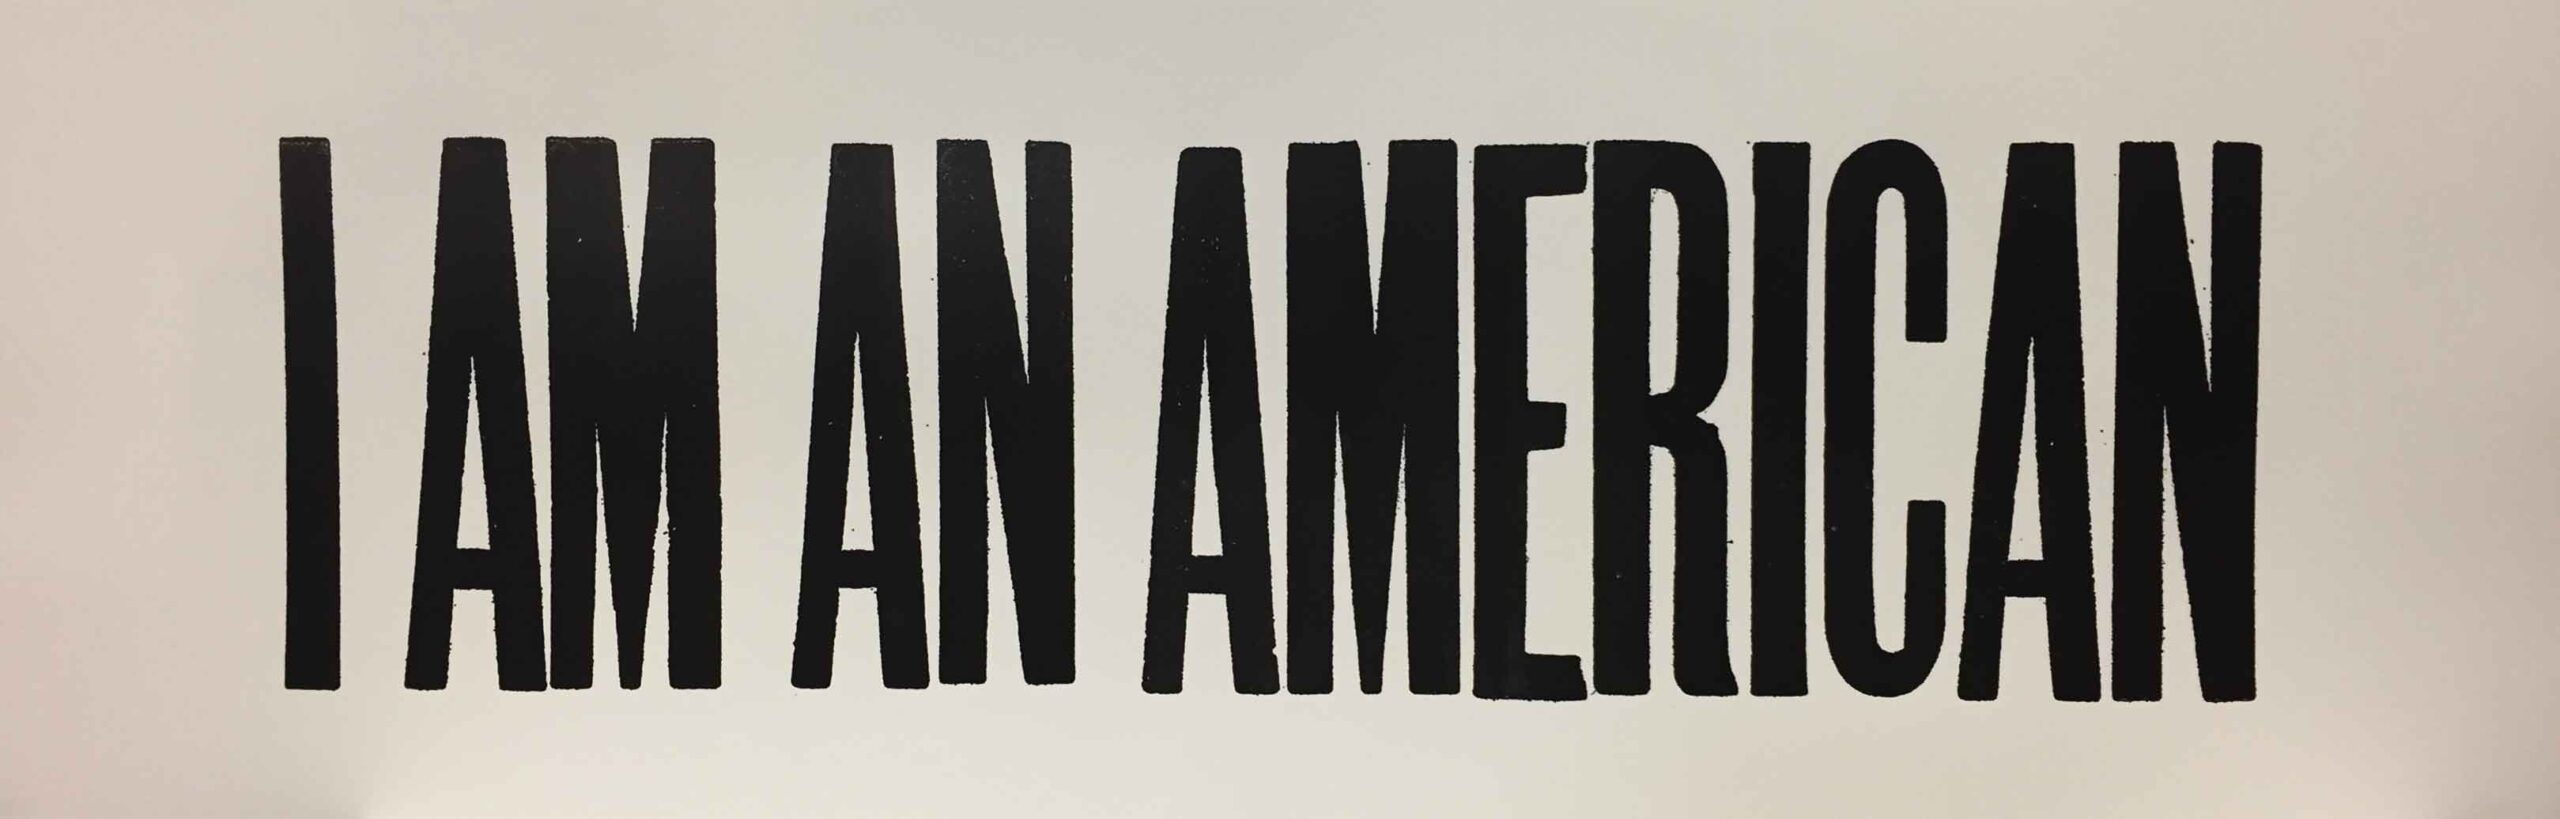 Lois Harada's Reminder, a letterpress impression of the text "I Am An American"